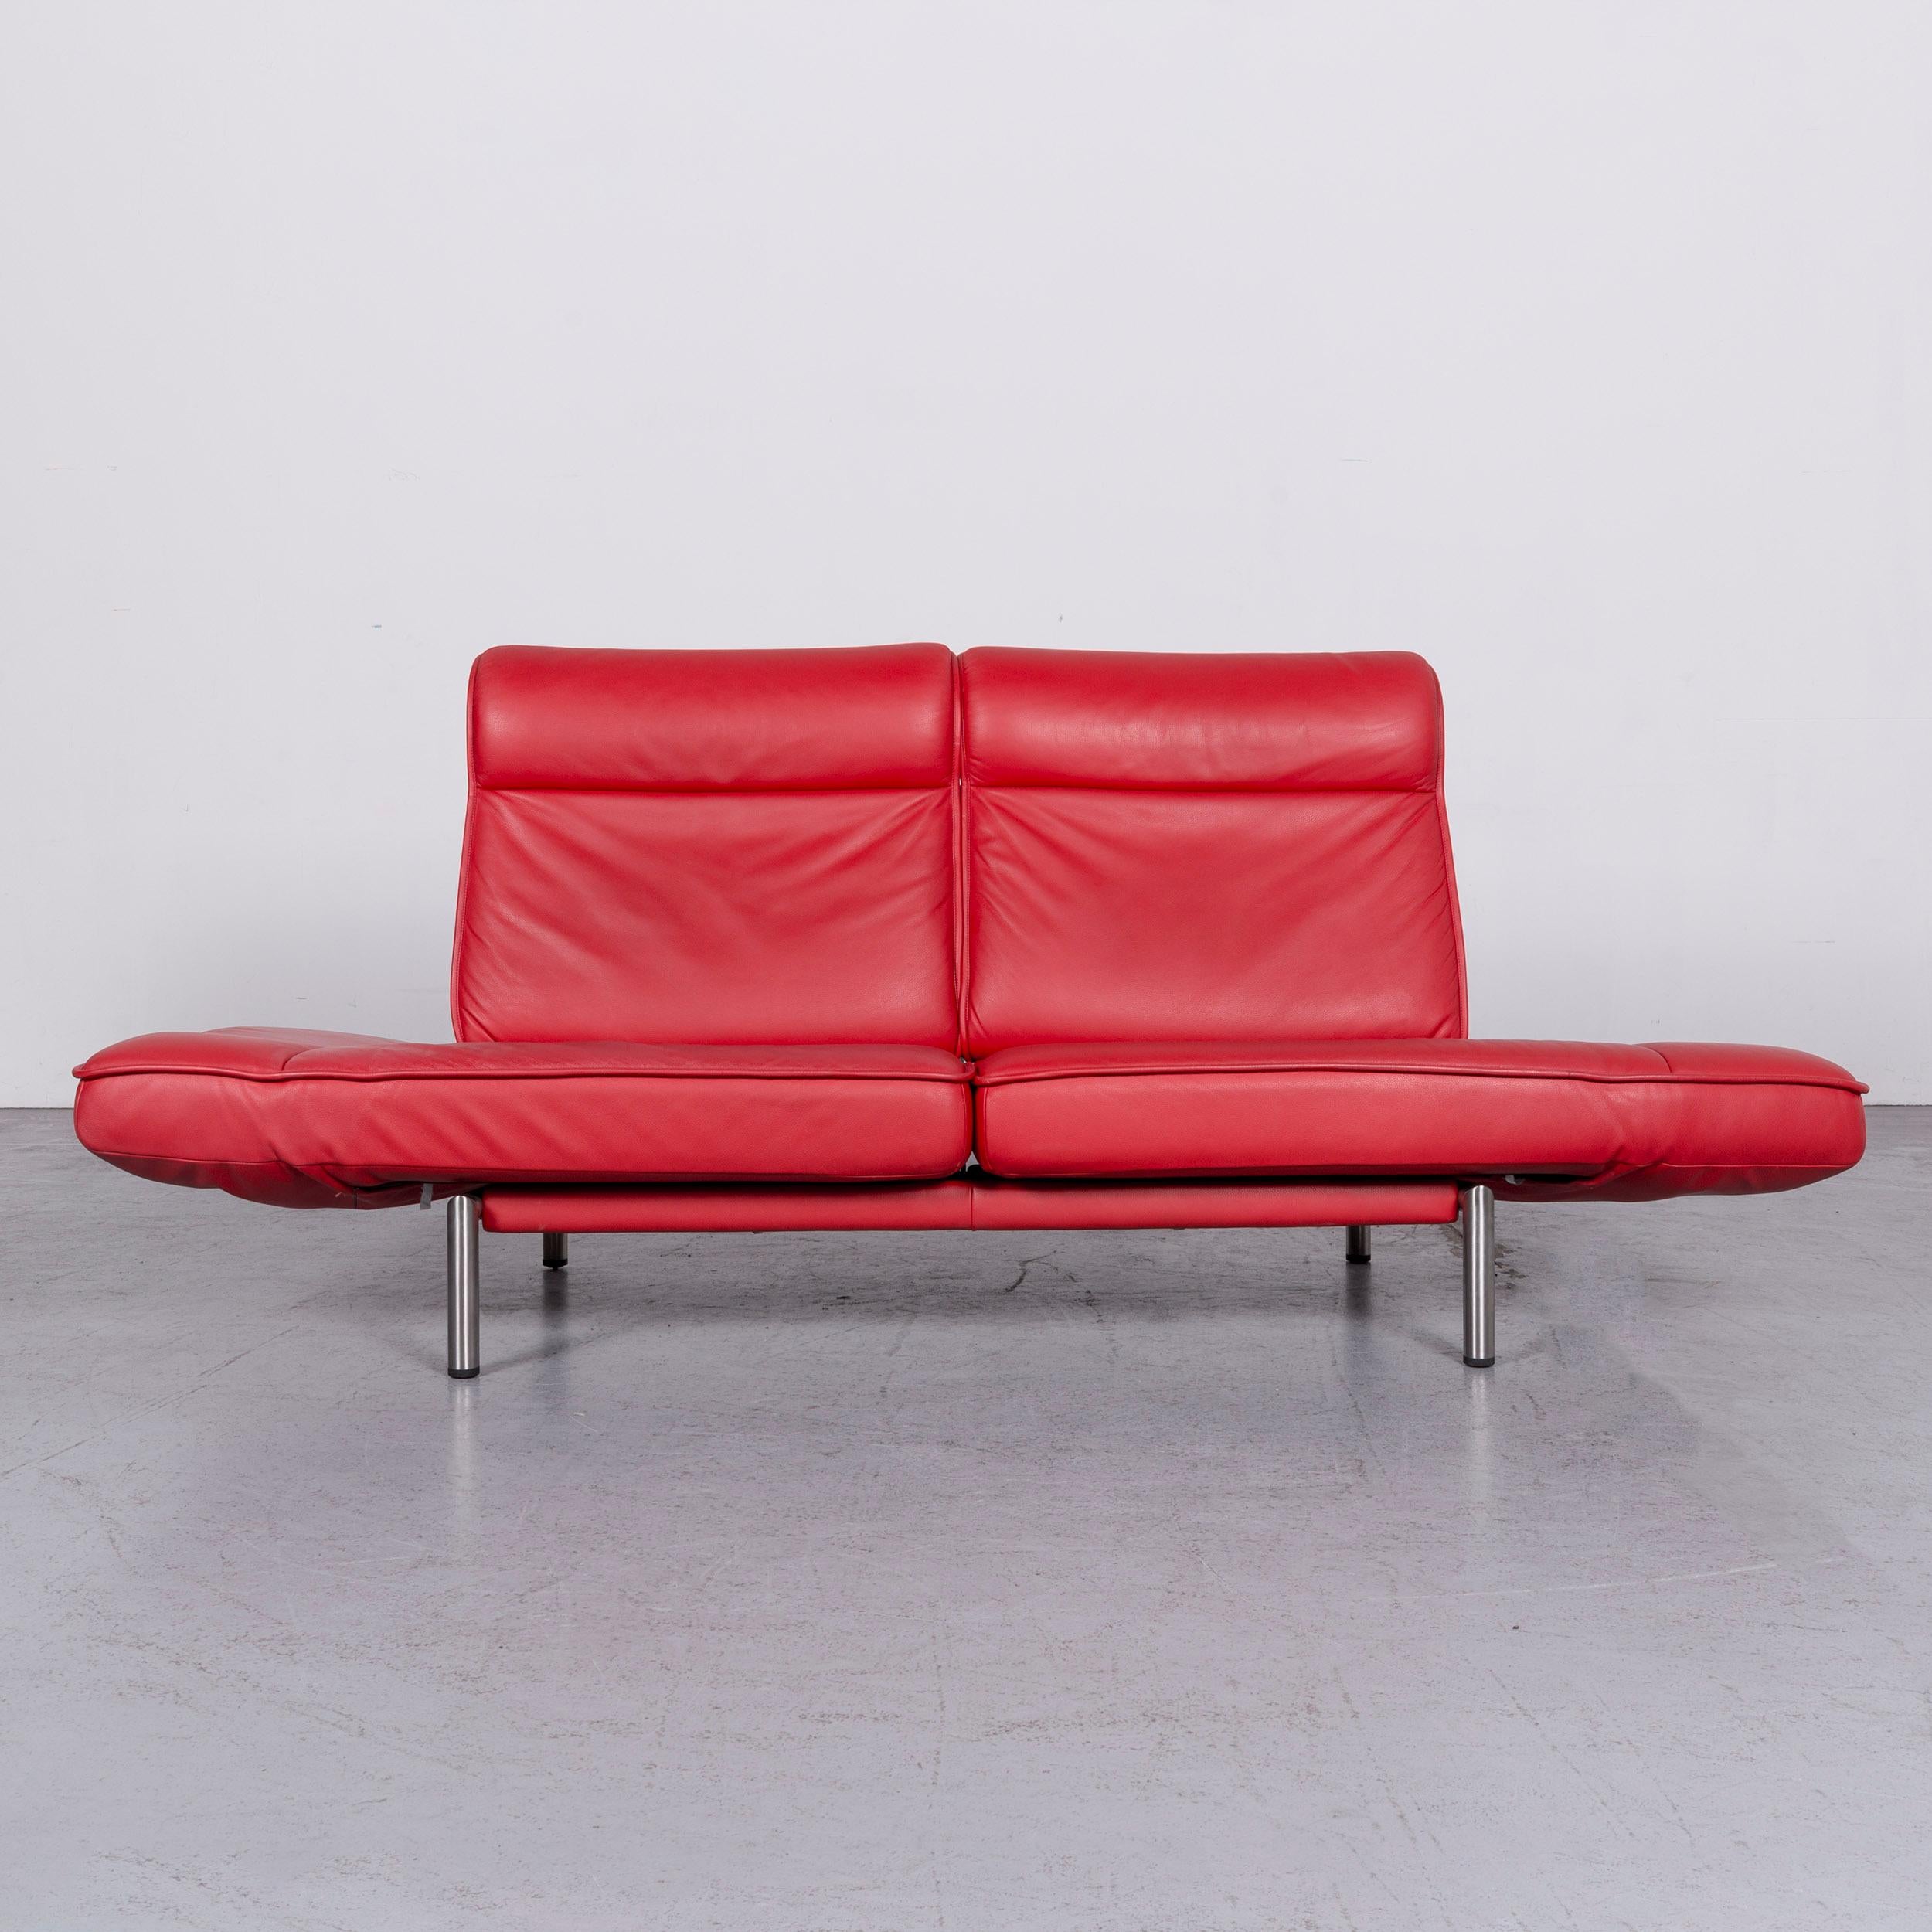 De Sede DS 450 Designer Sofa Red Leather Three-Seat Couch Made in Switzerland In Good Condition For Sale In Cologne, DE